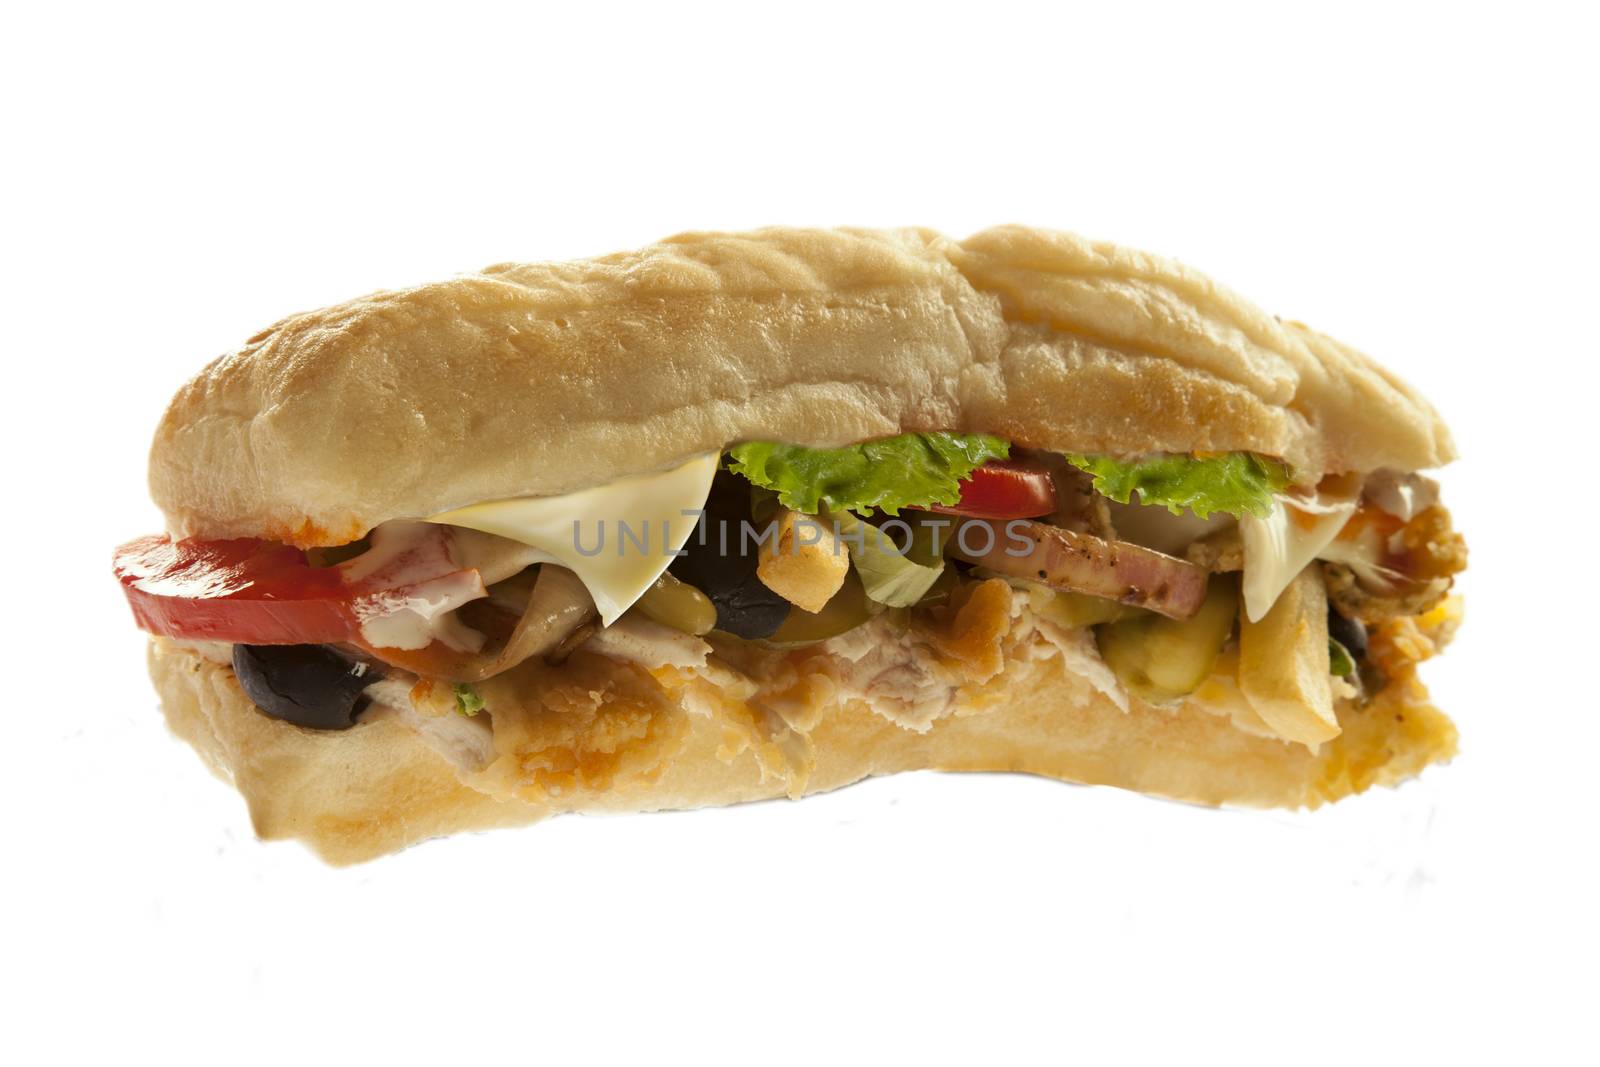 Mighty sub hoagie sandwich with fries meat and veggies by haiderazim